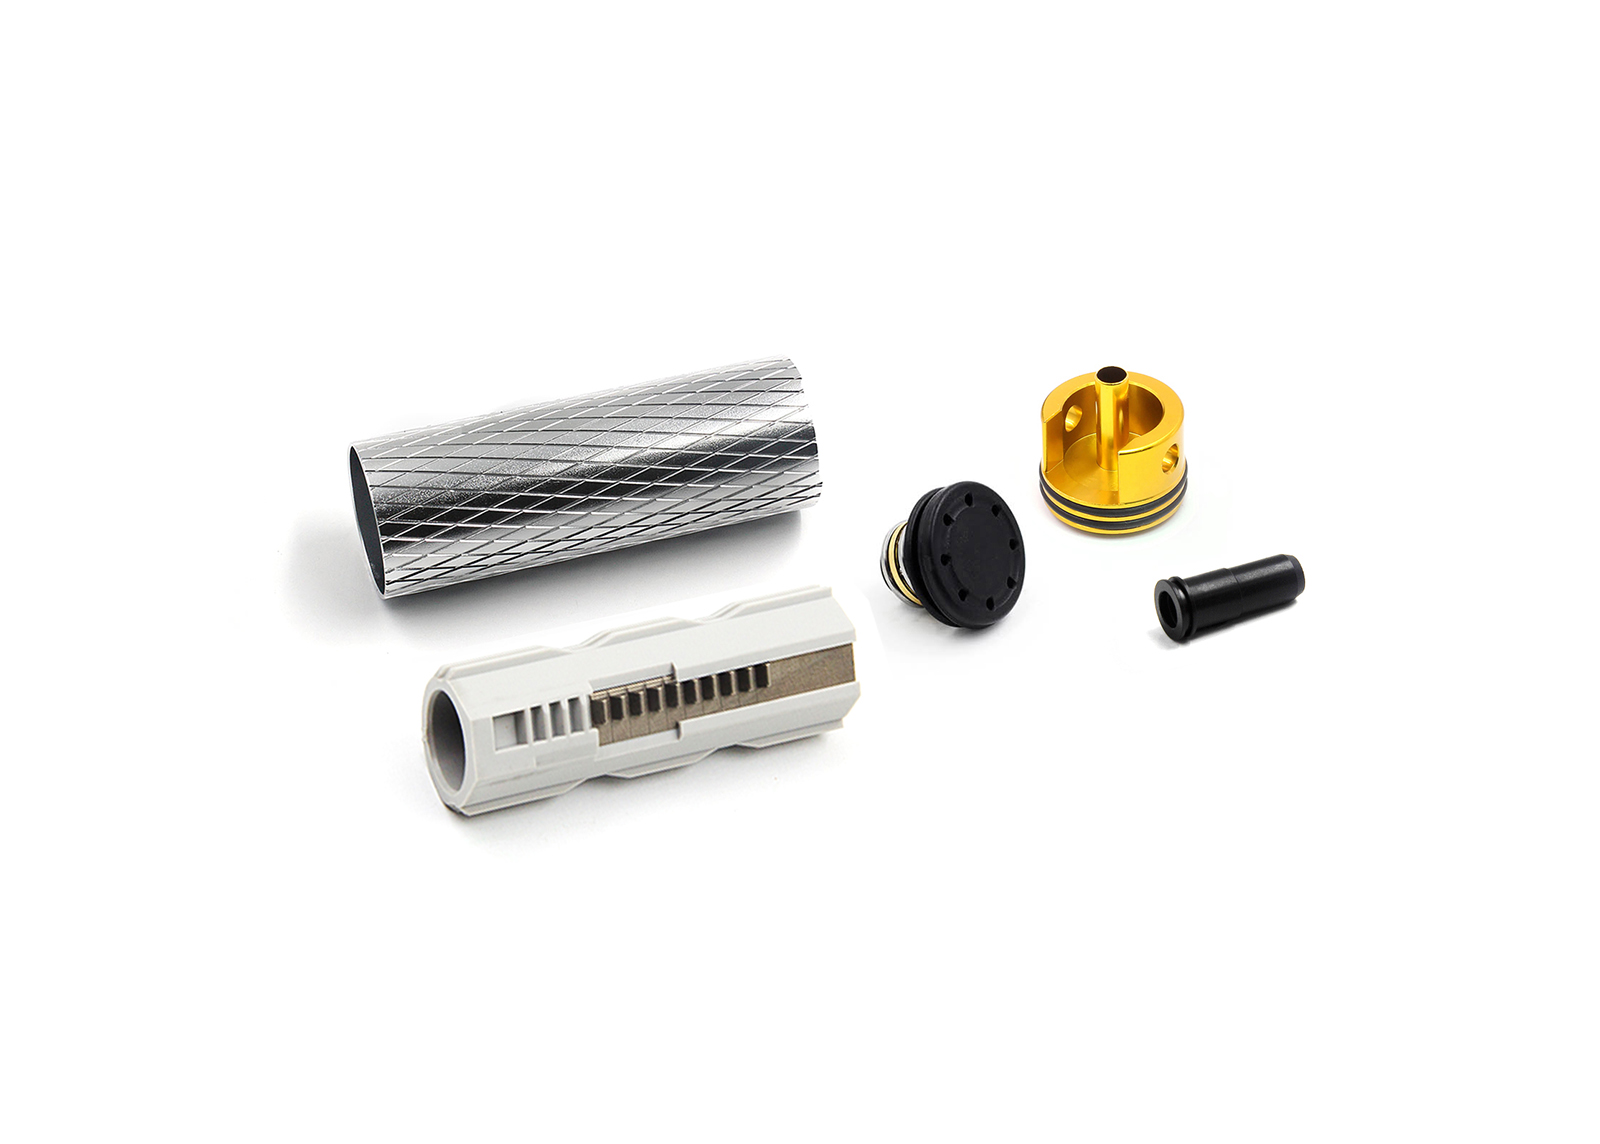 Cylinder Set for M16-A2 (AOE Piston) - Modify Airsoft parts